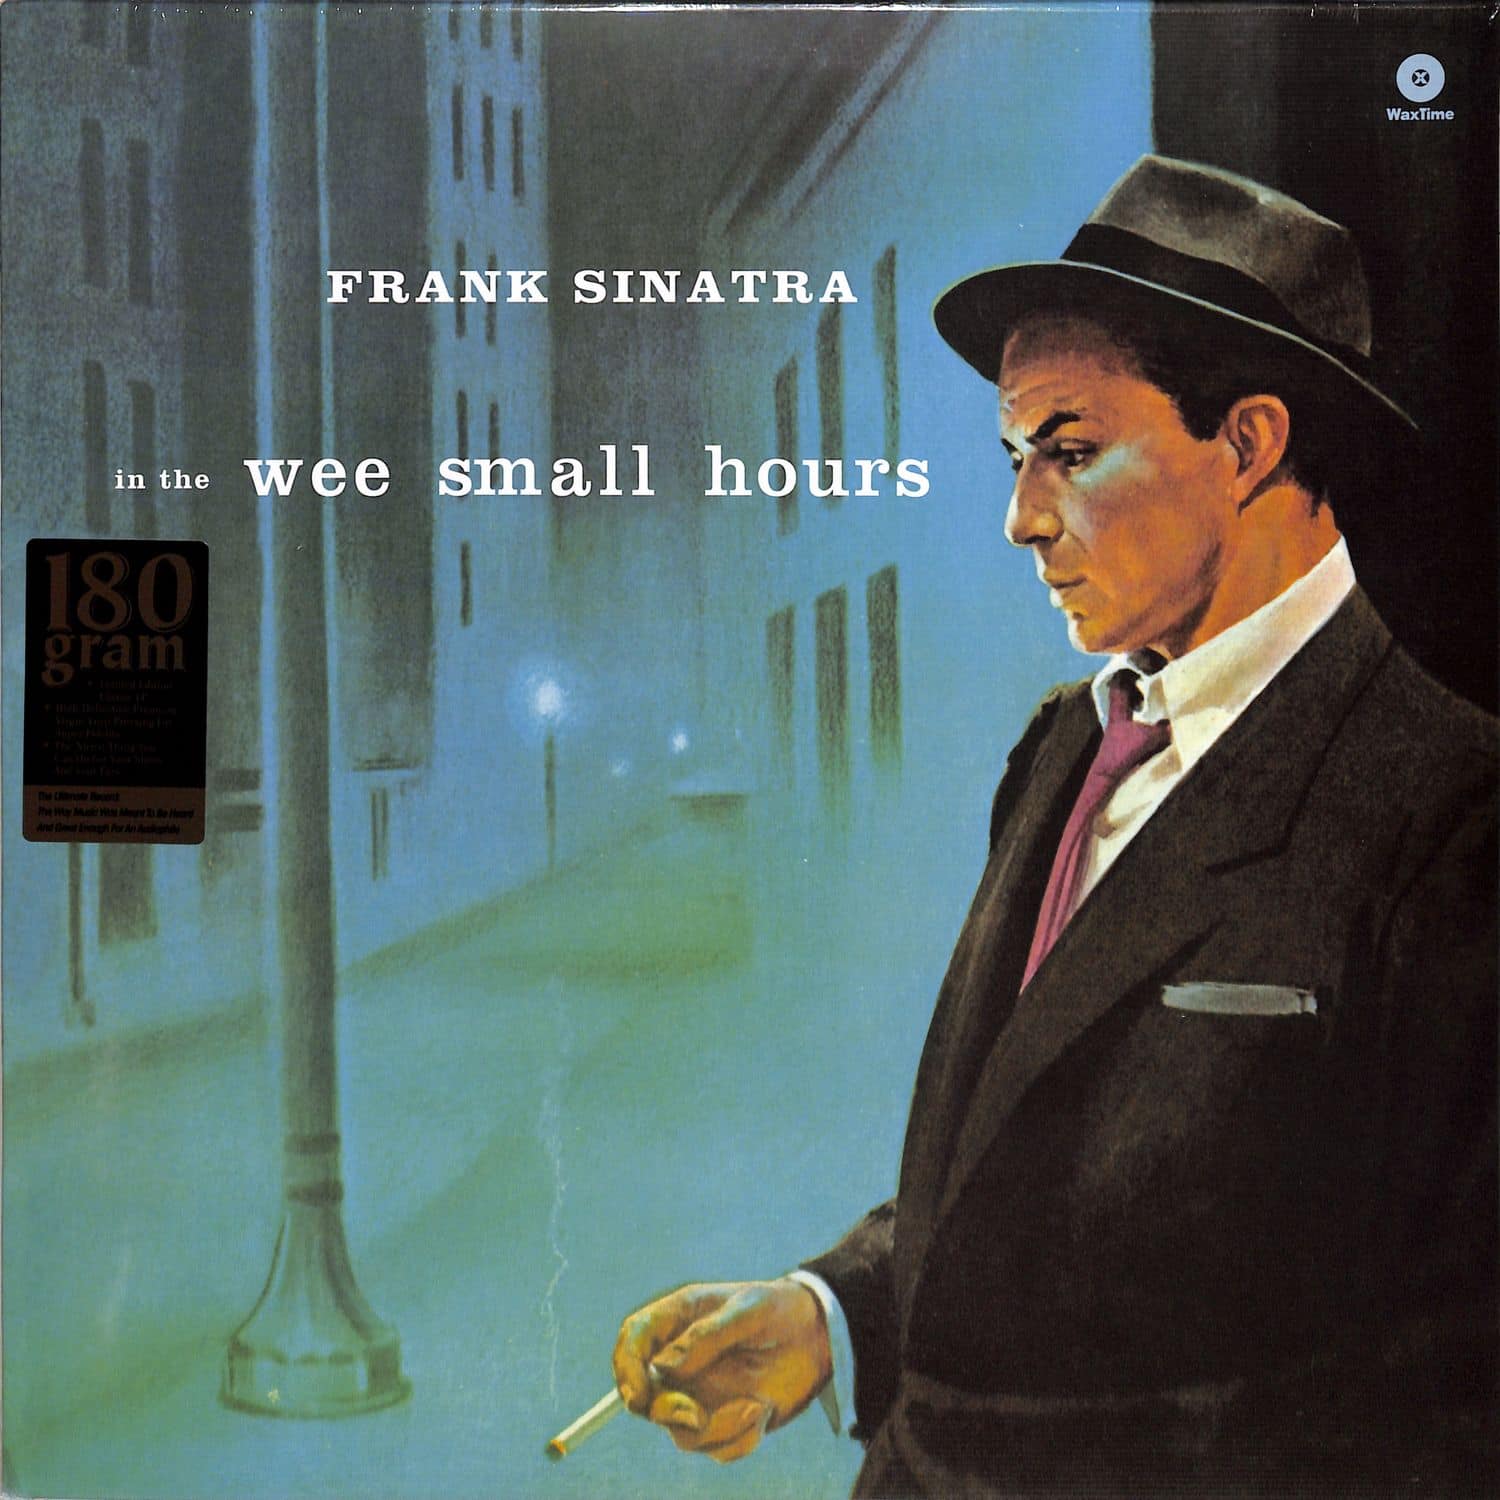 Frank Sinatra - IN THE WEE SMALL HOURS 